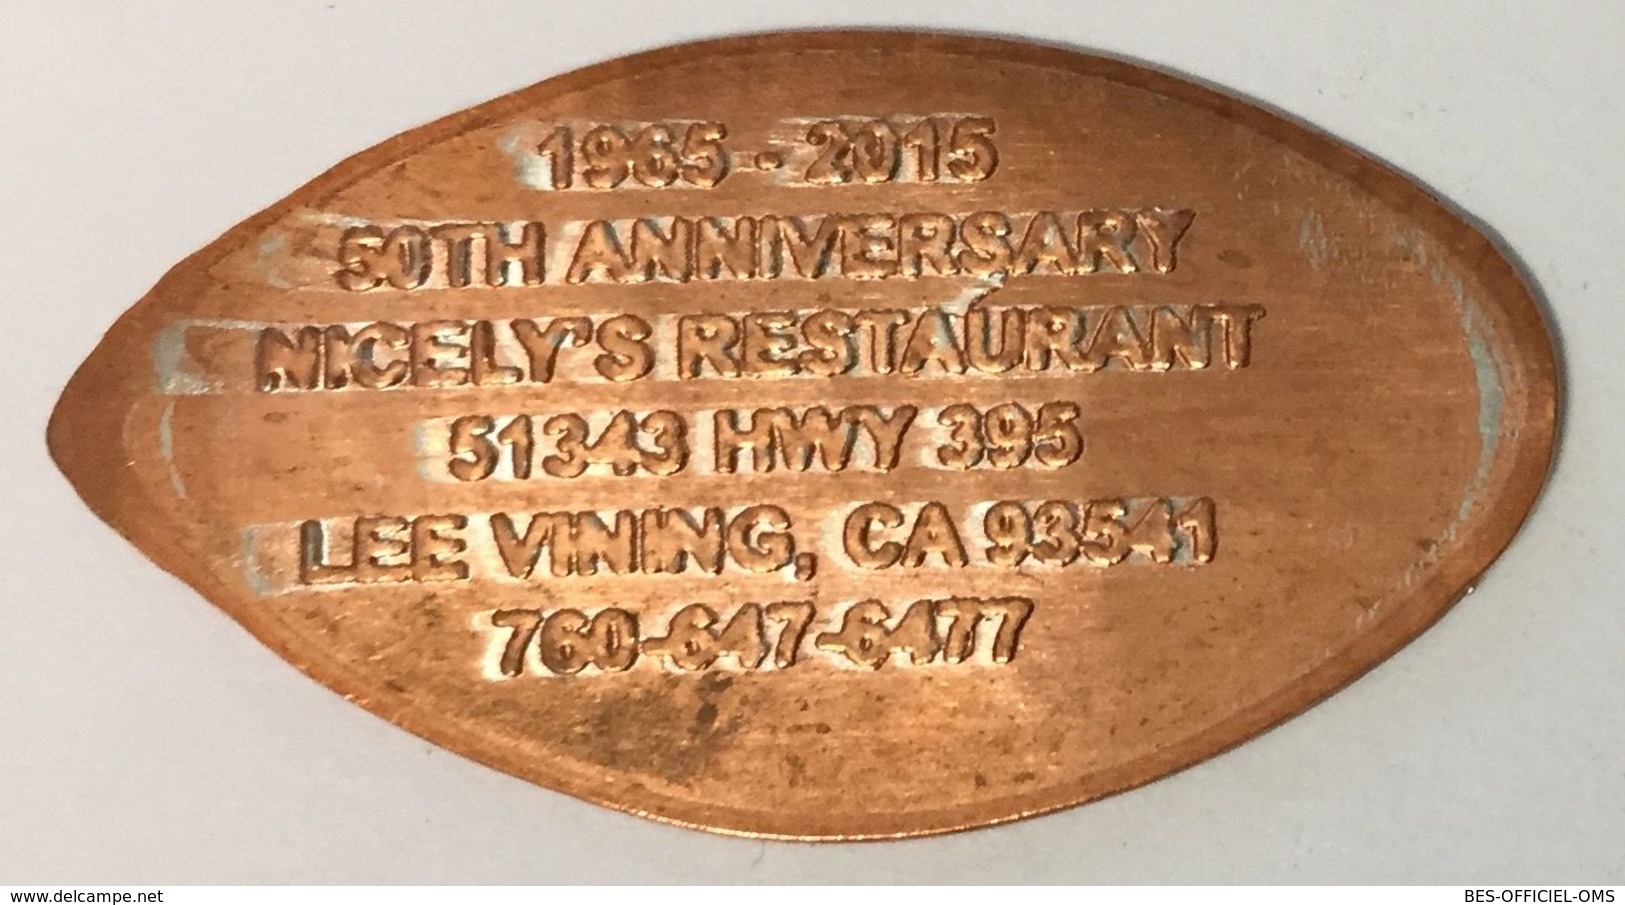 ÉTATS-UNIS USA MONO LAKE LEE VINING CA NICELY'S PENNY 1965-2015 ELONGATED COIN PIÈCE ÉCRASÉE MEDALS TOKENS - Elongated Coins